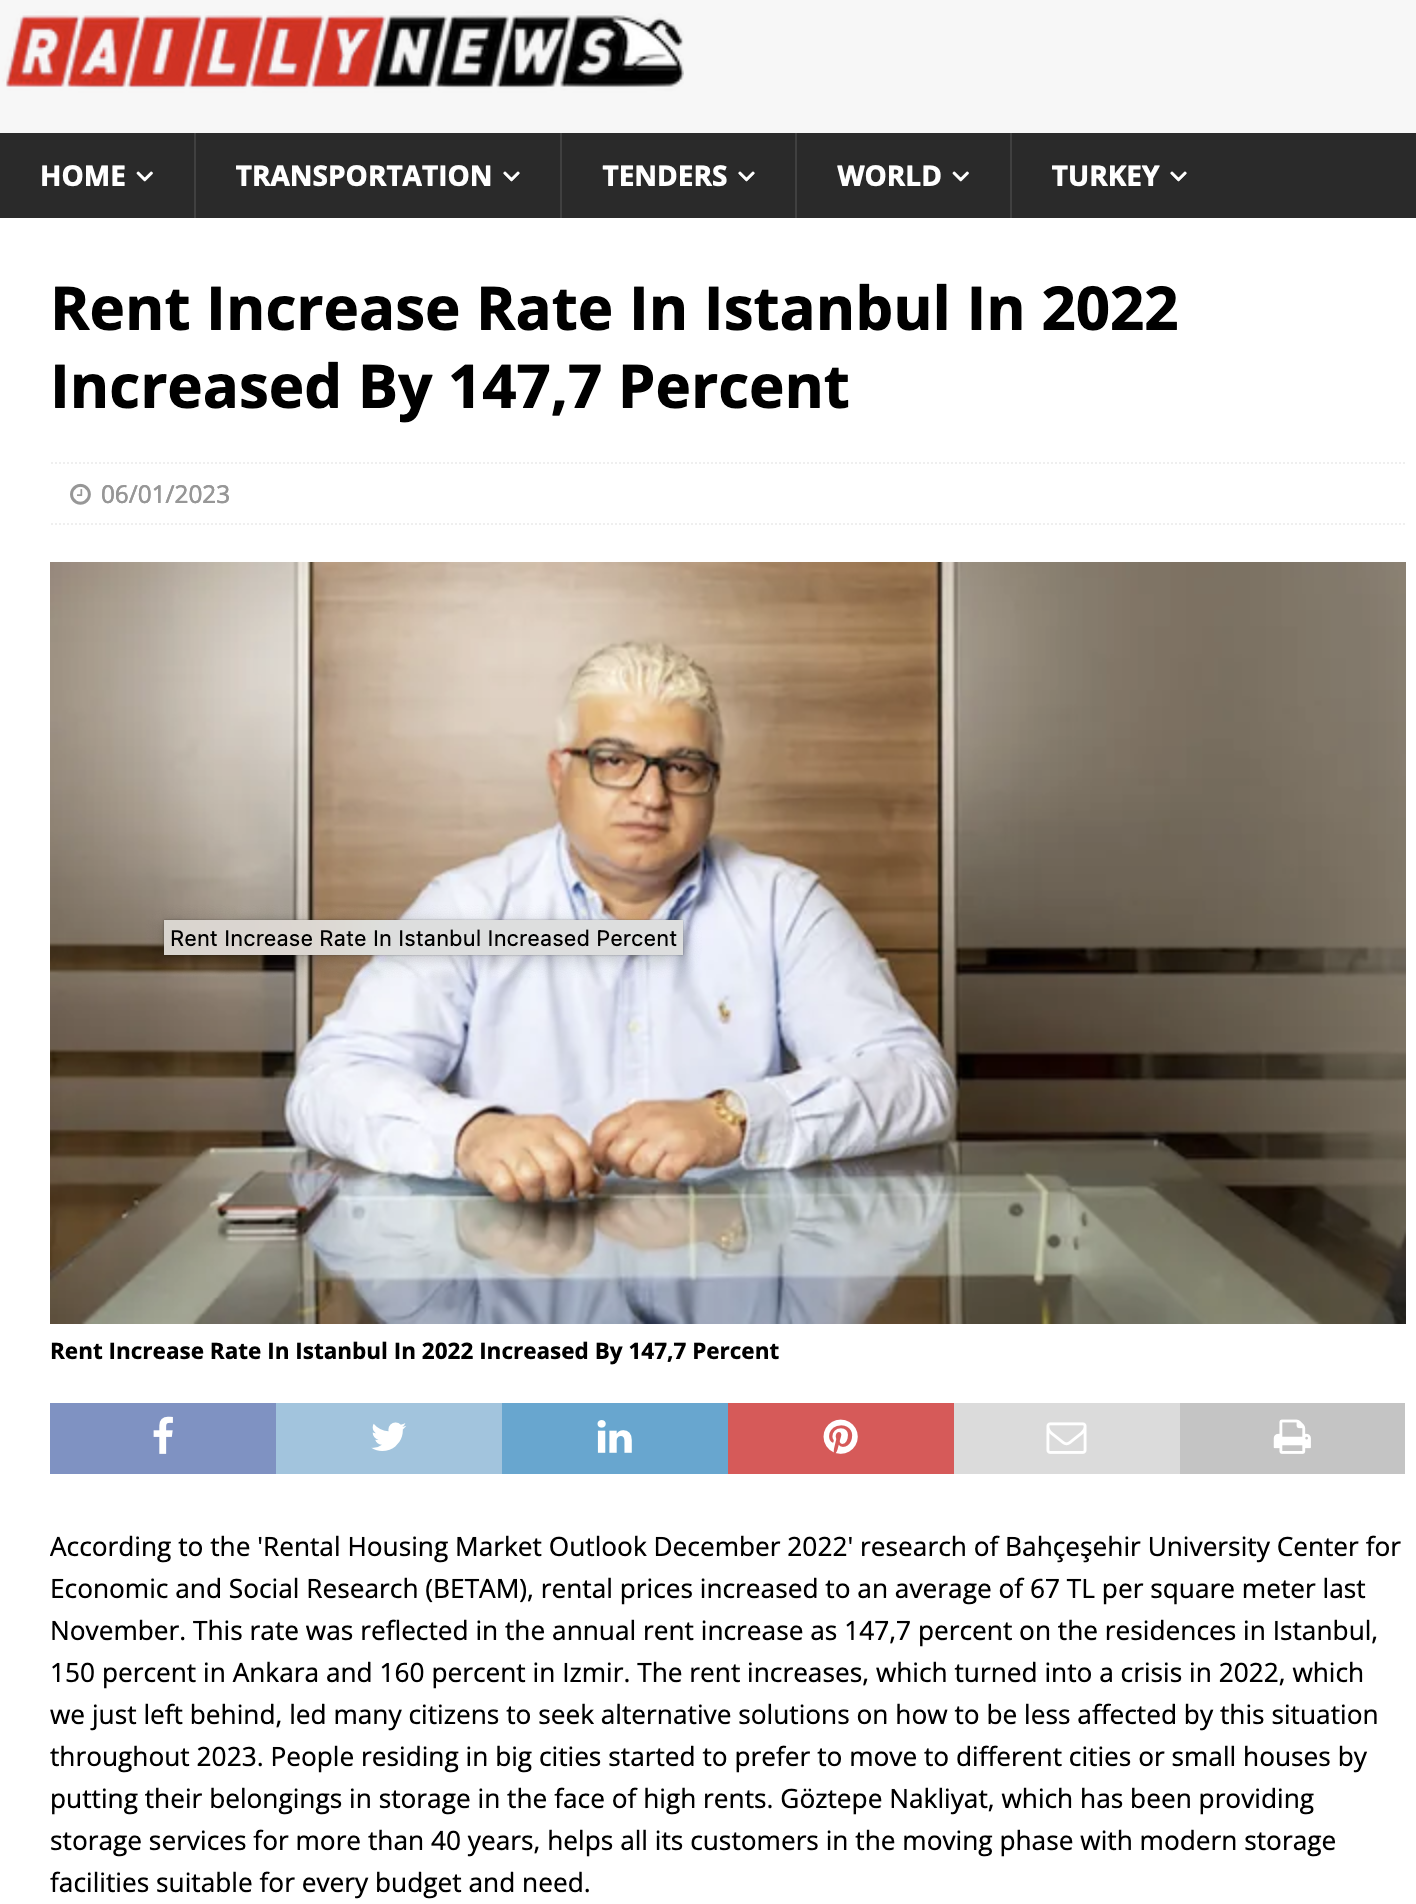 Rent Increase Rate In Istanbul In 2022 Increased By 147,7 Percent